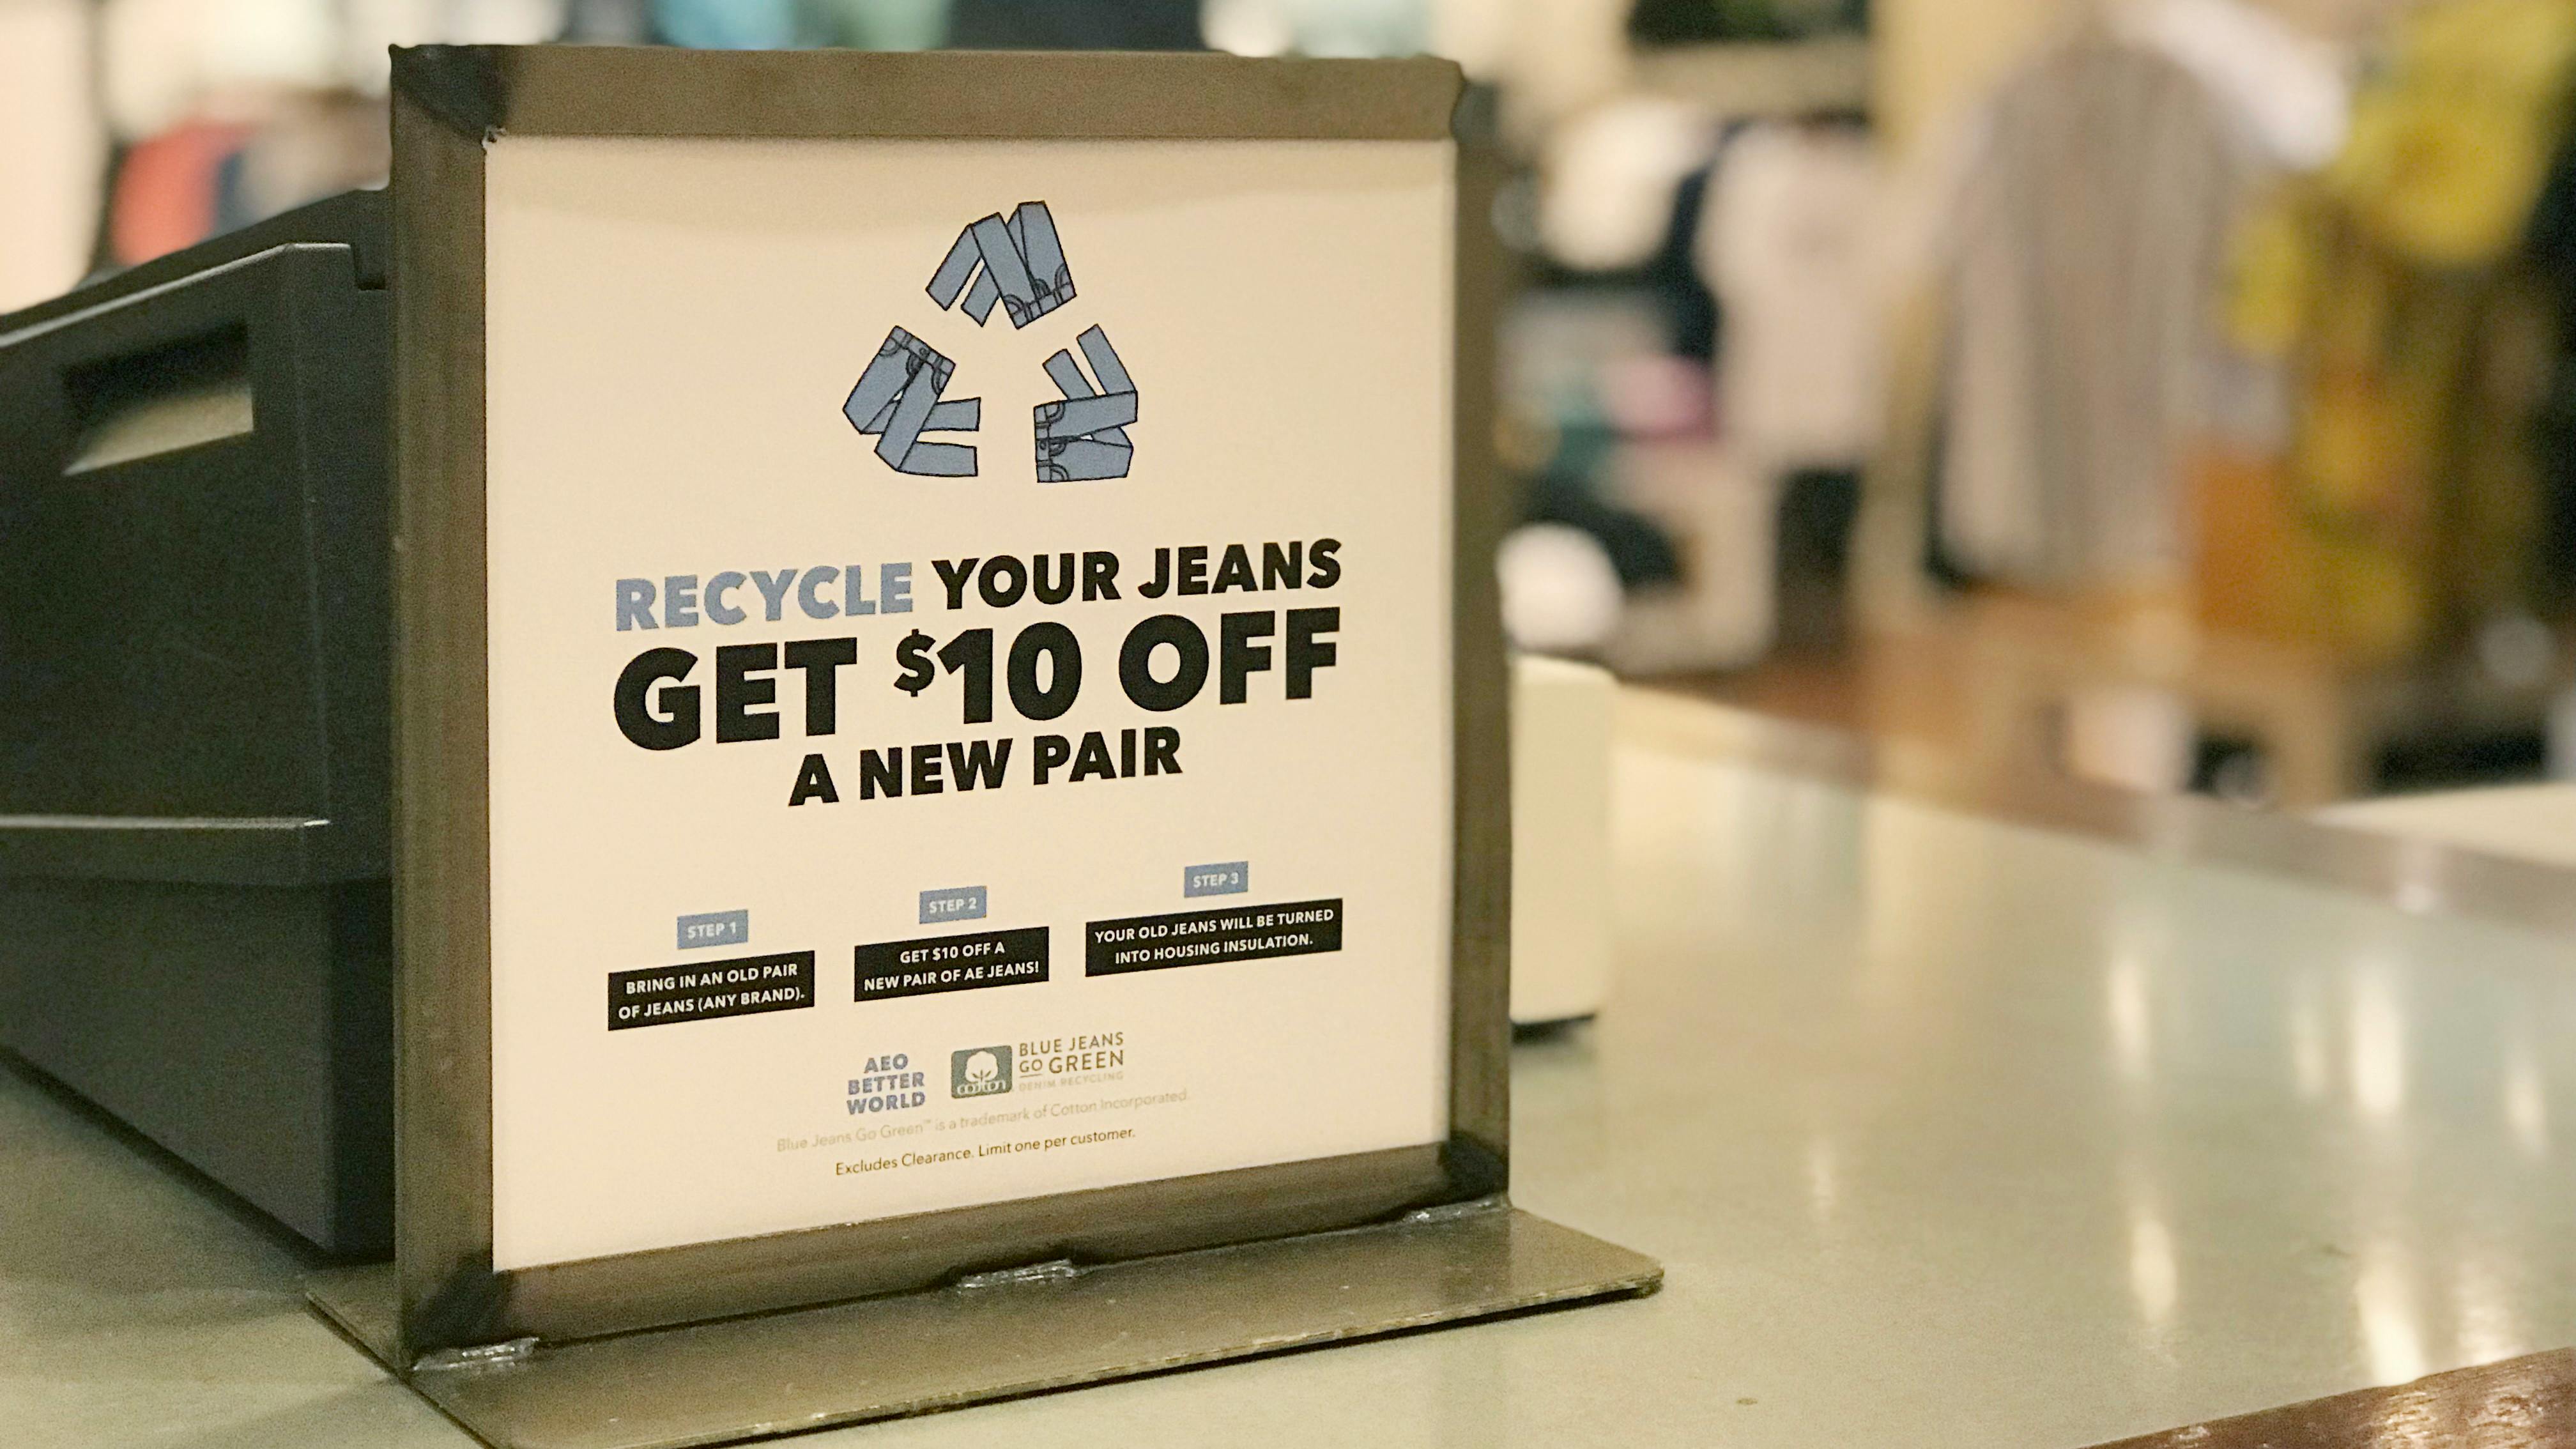 Recycle your old jeans for $10 off a new pair.